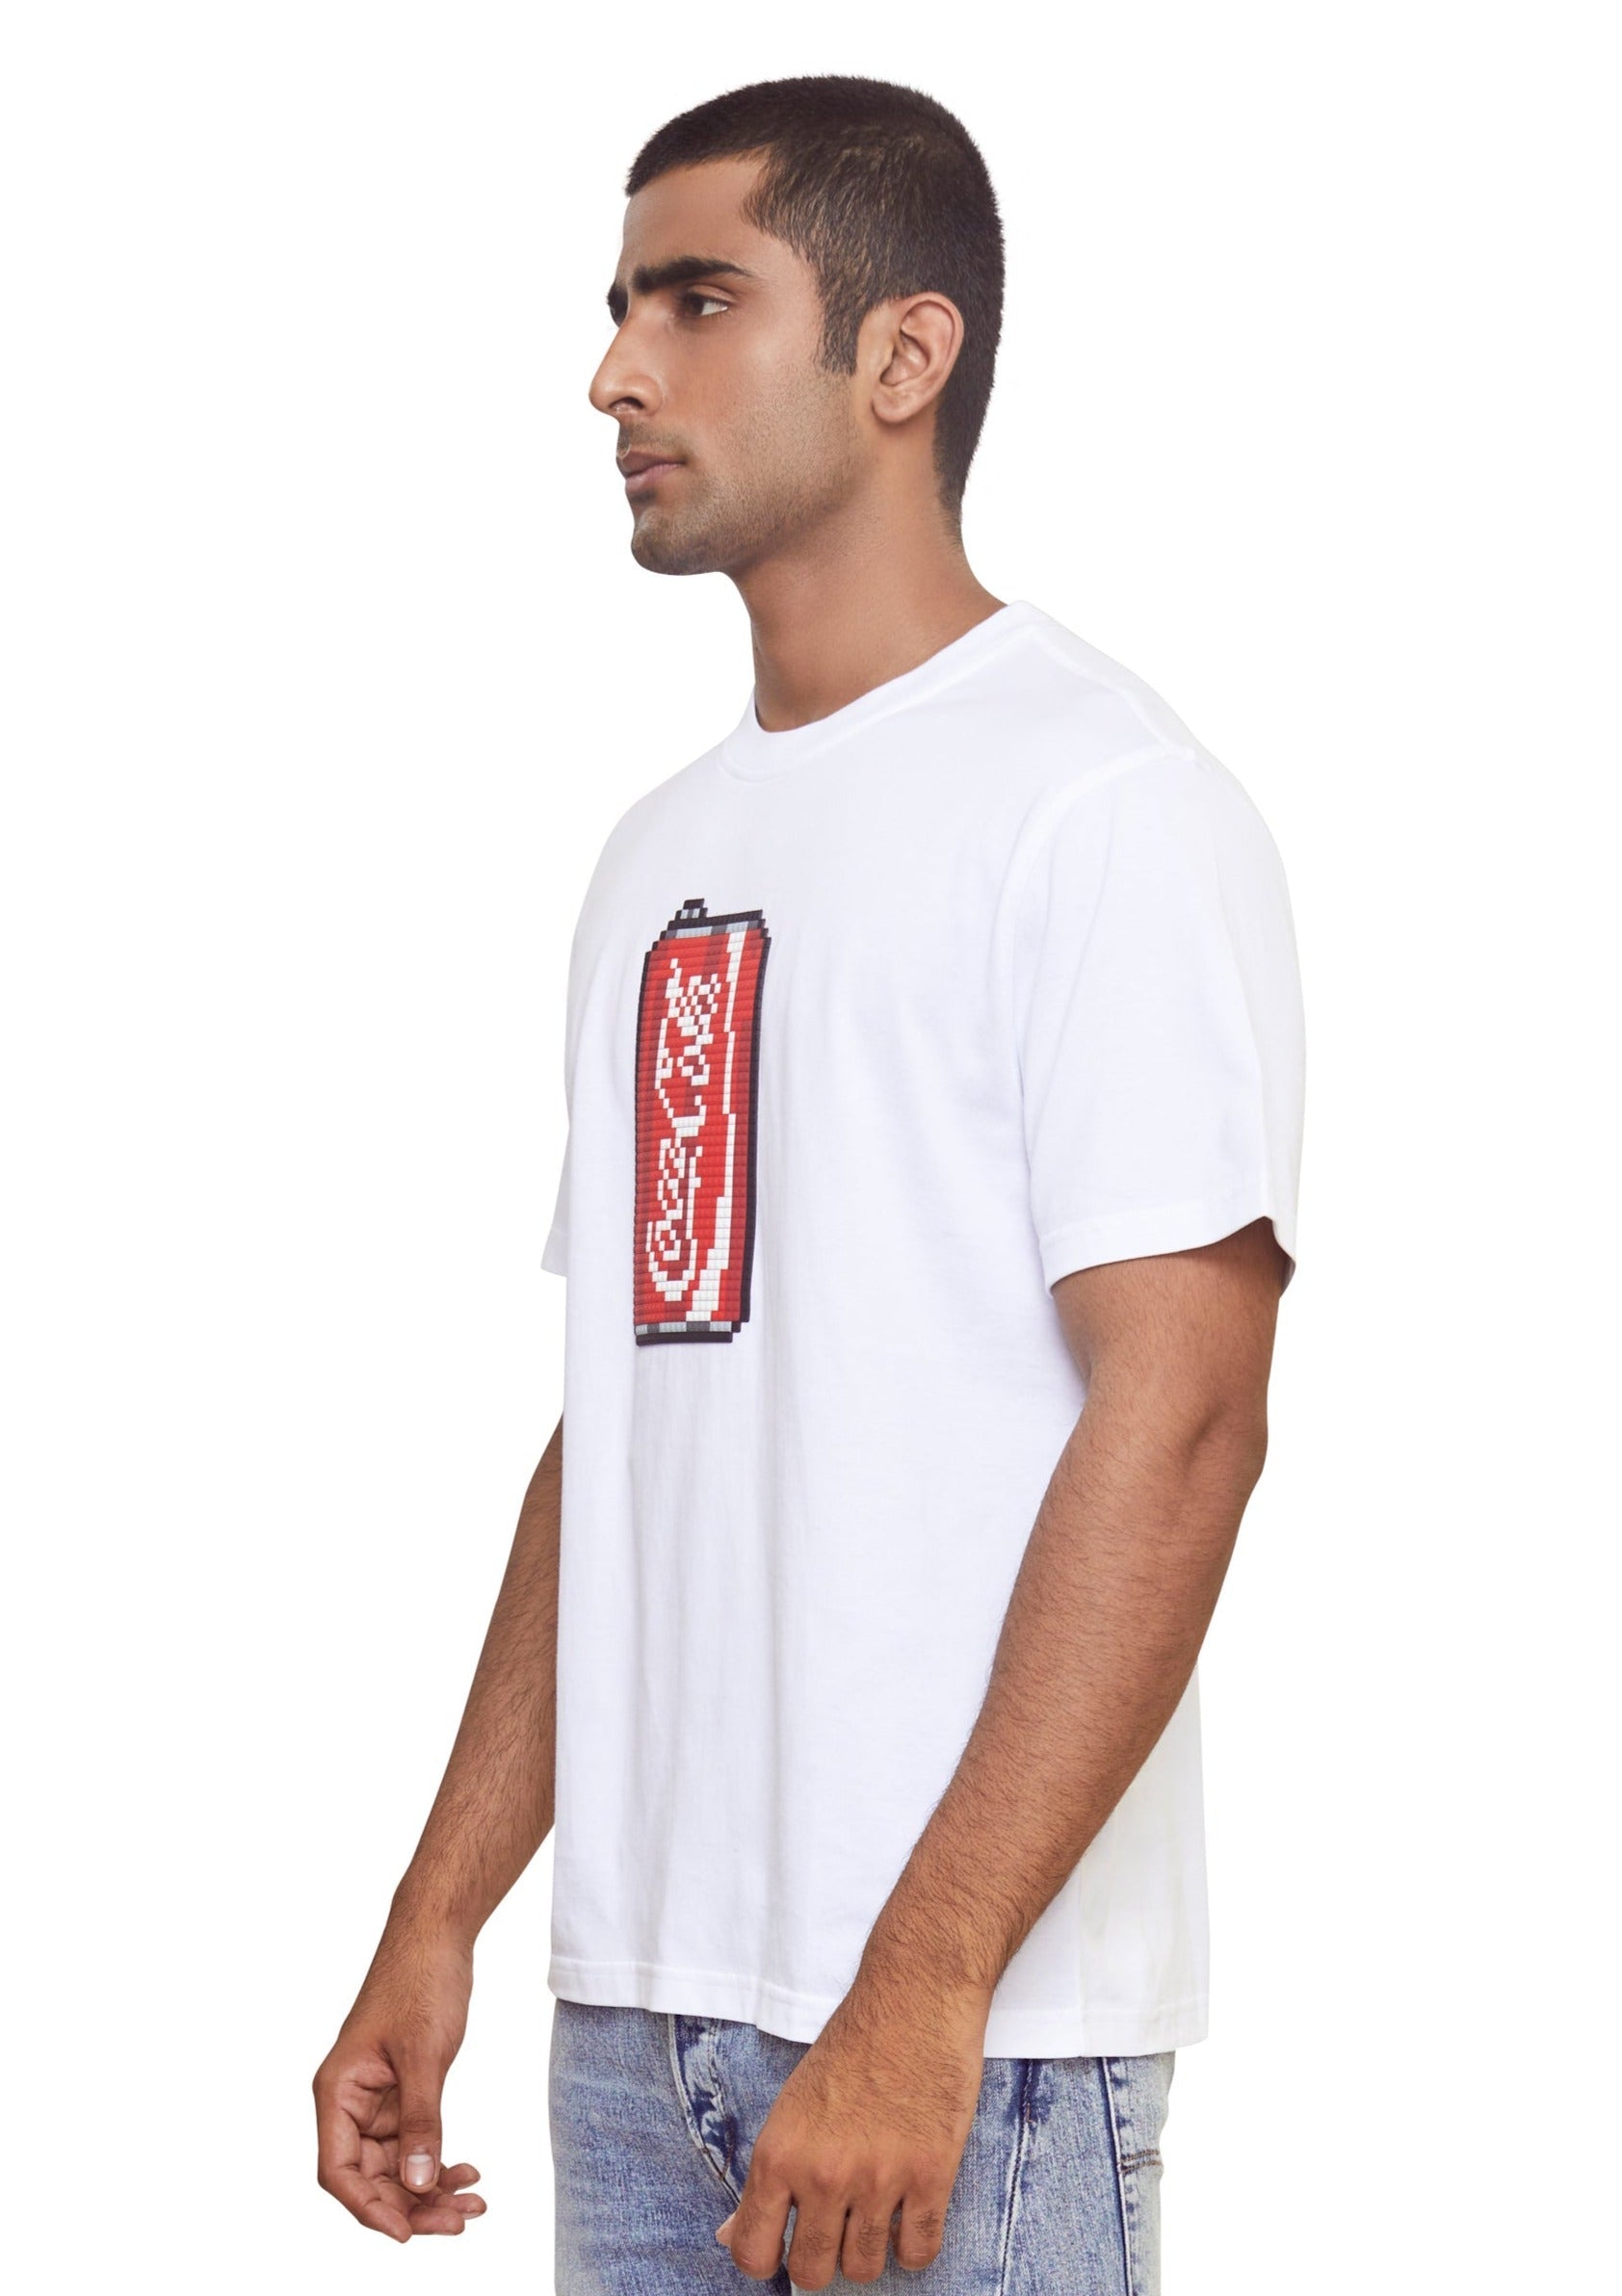 black/red cotton graphic print crew neck t-shirt with short sleeves from the brand 8-bit